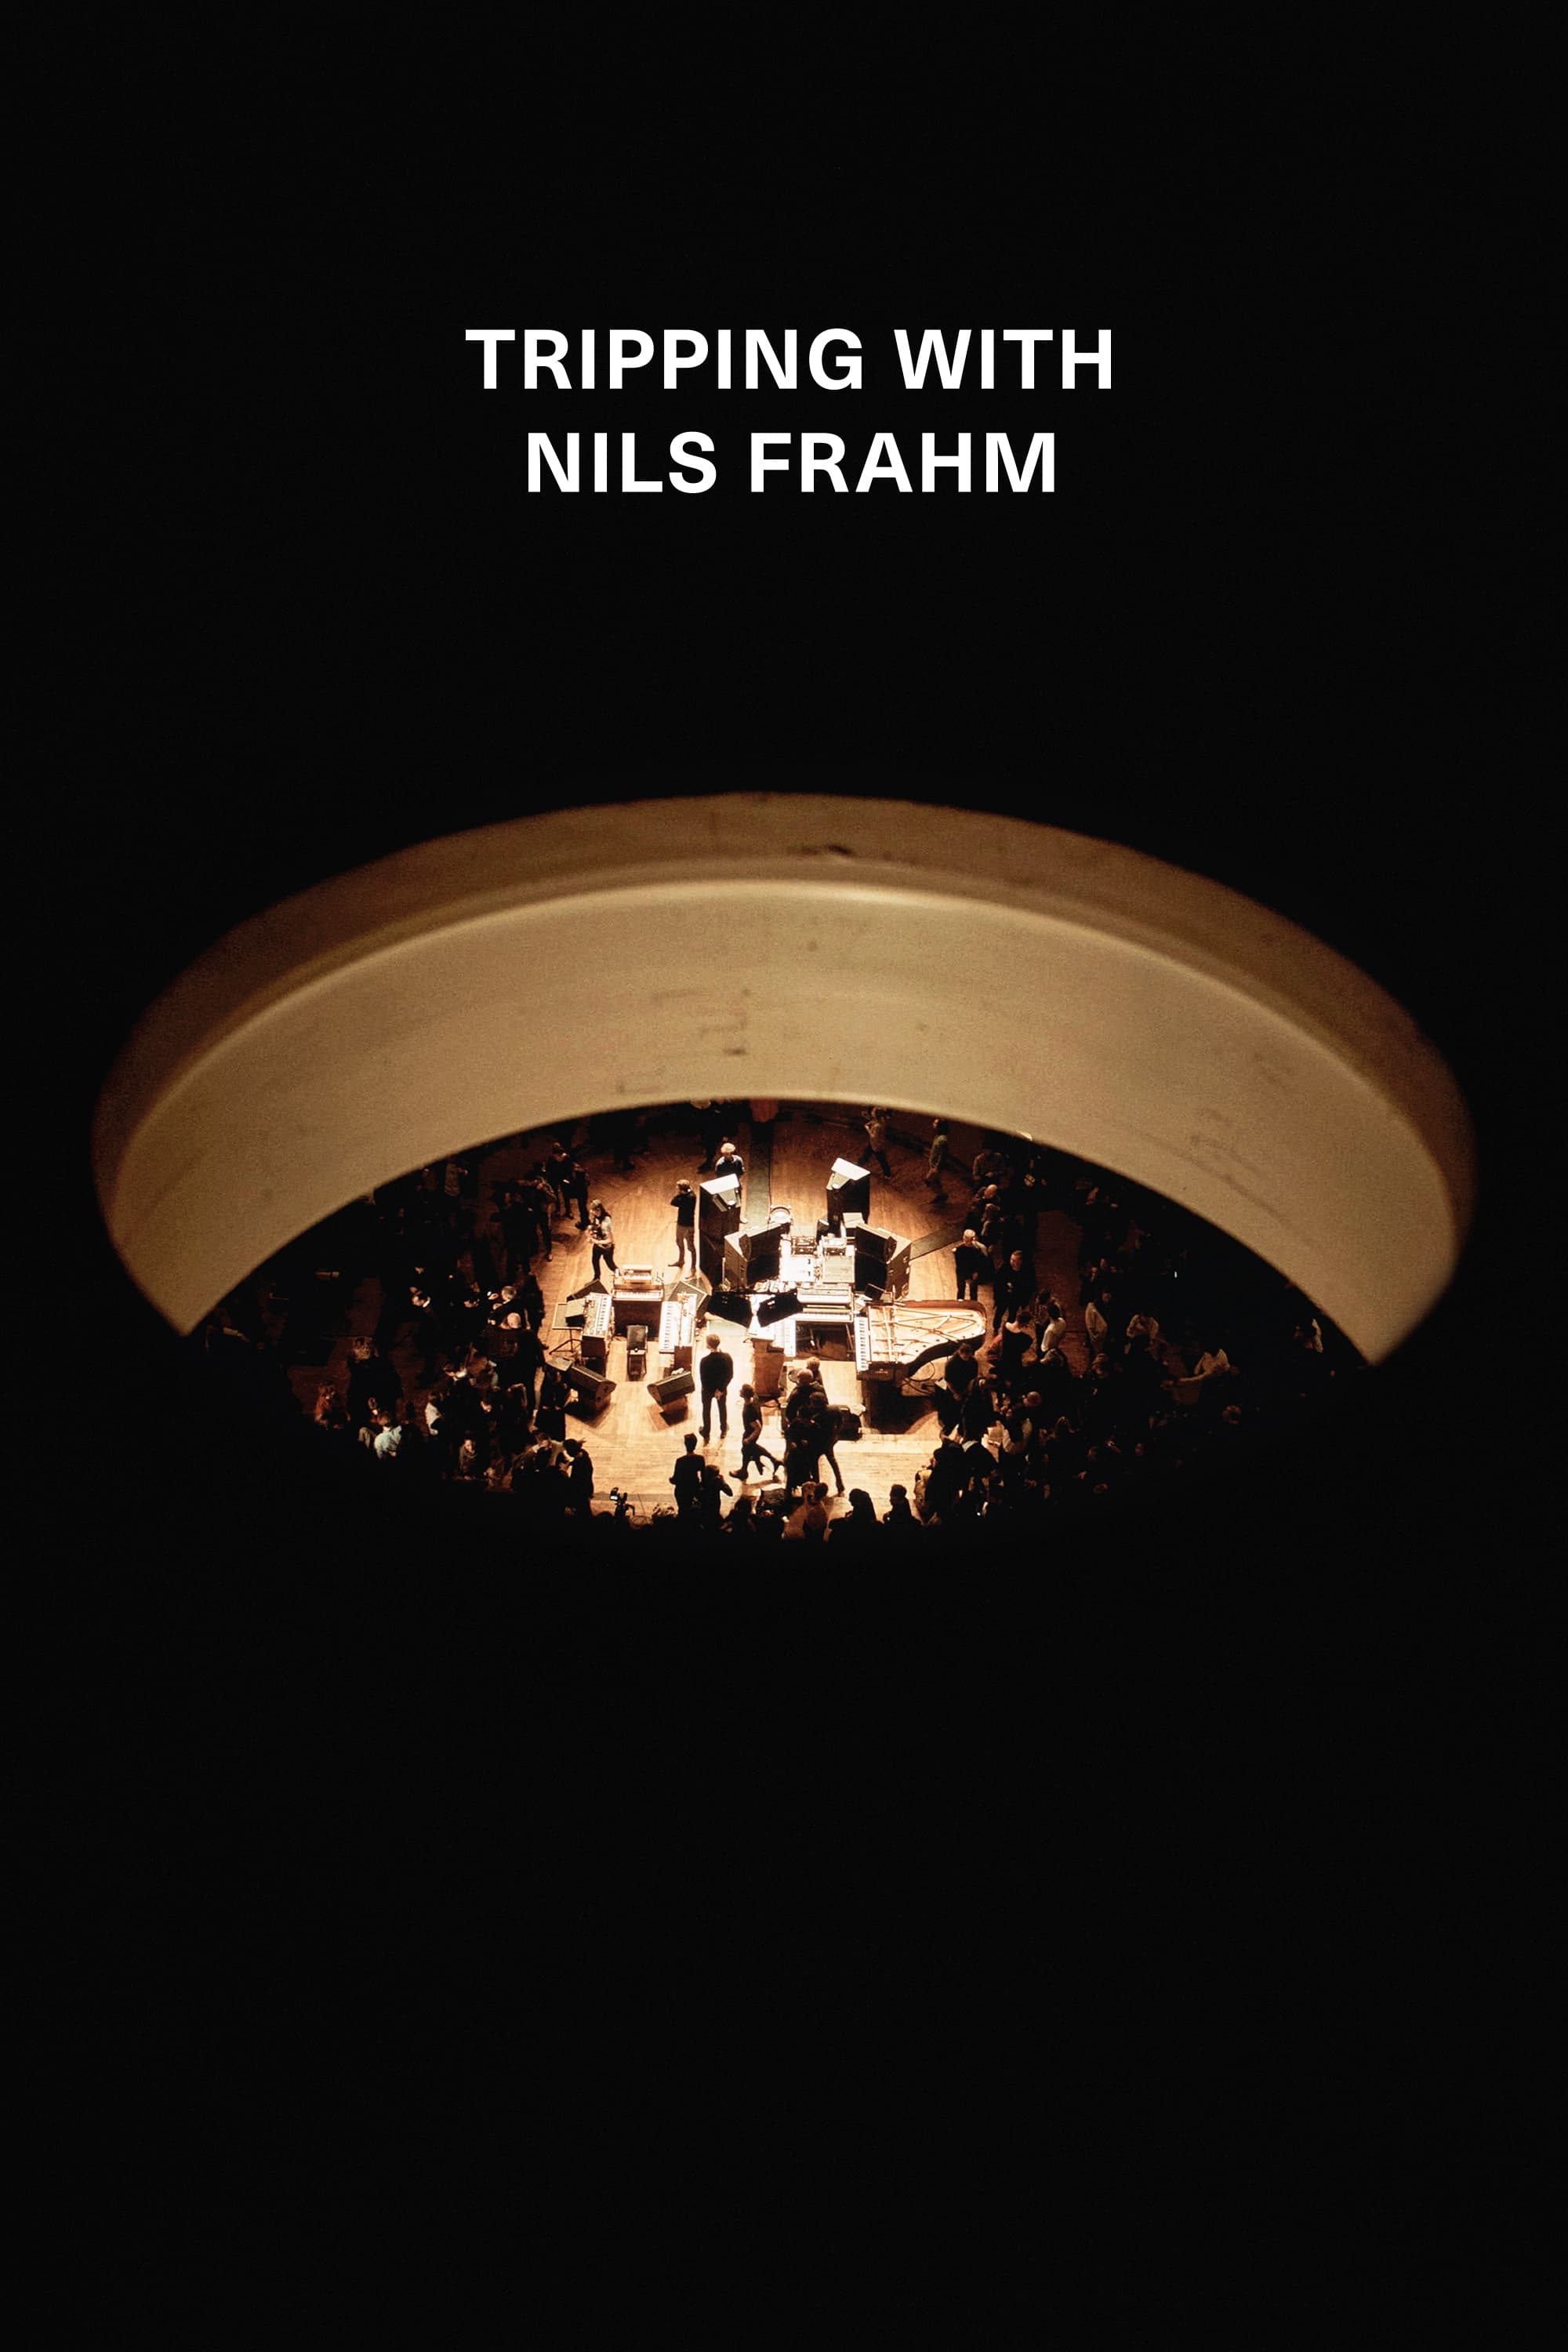 Tripping with Nils Frahm (2020)